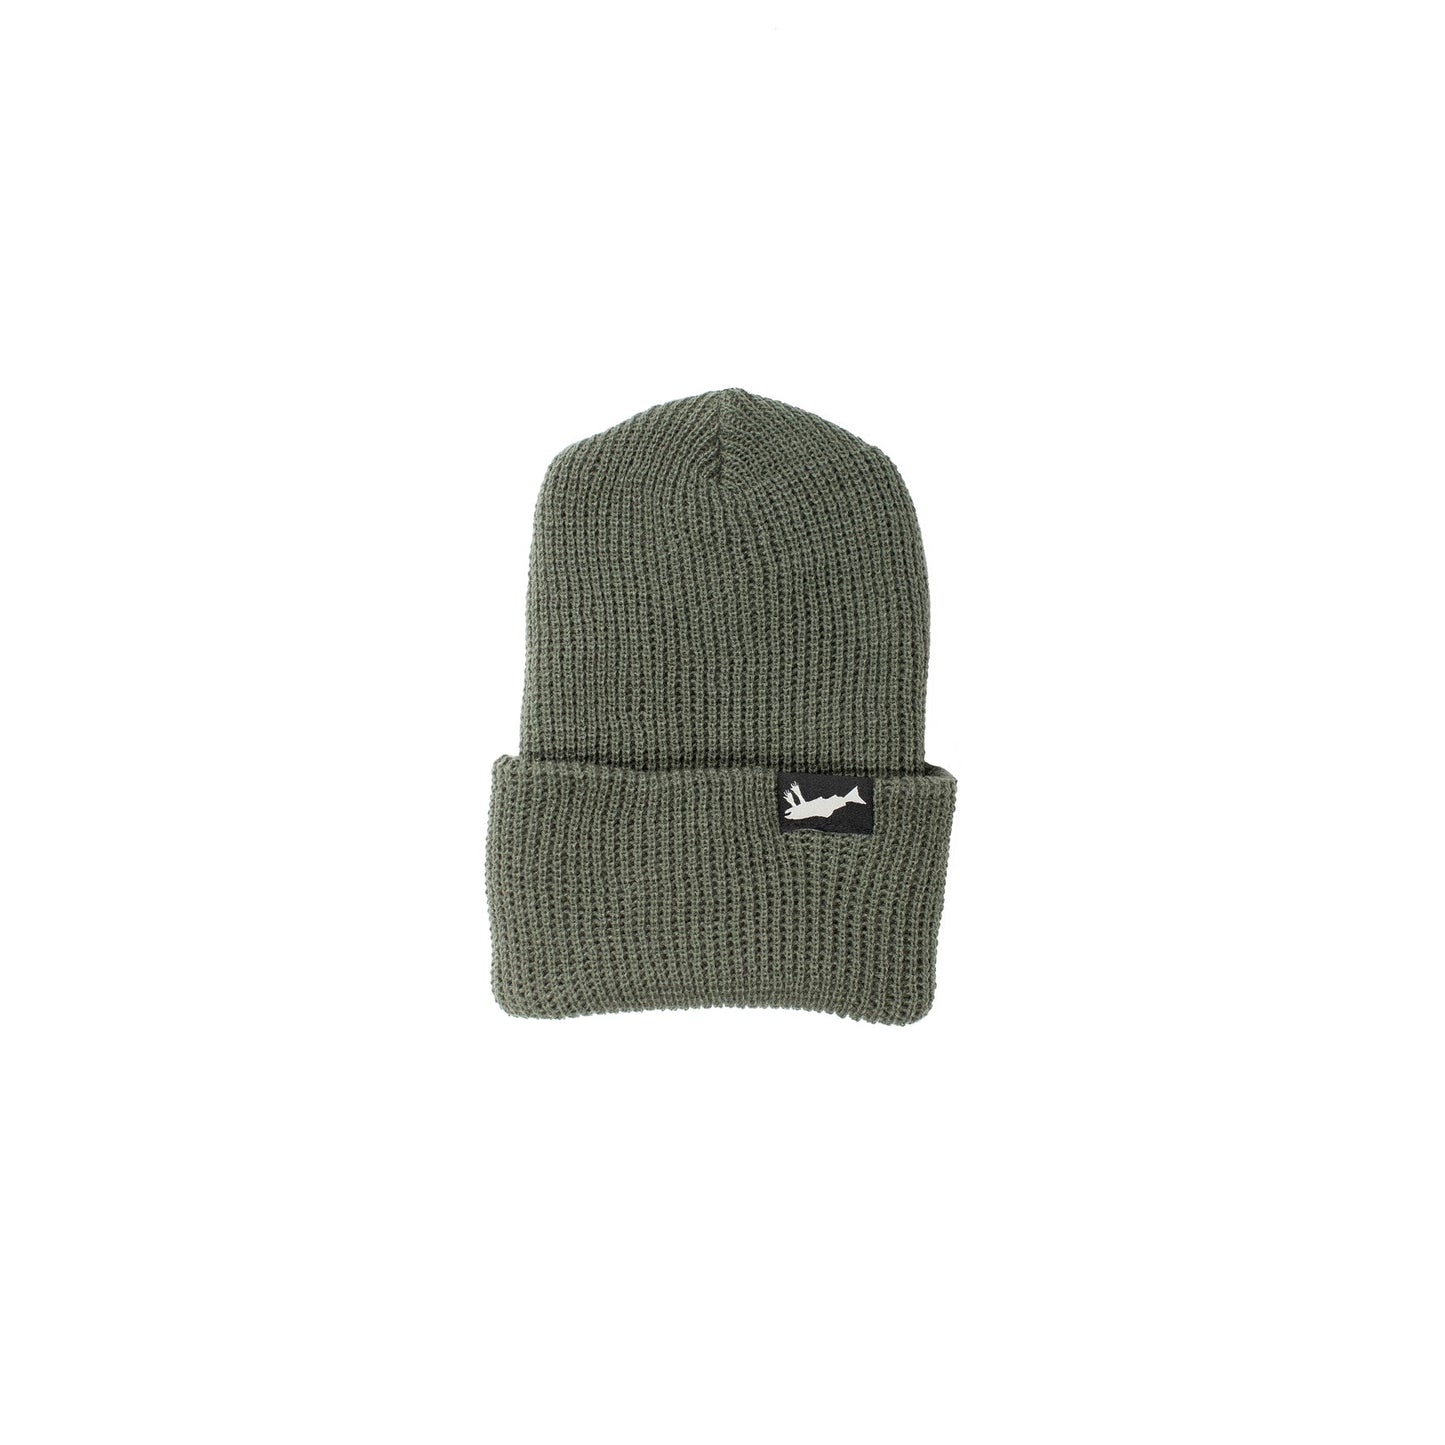 Salmon Arms- Watchman Toque